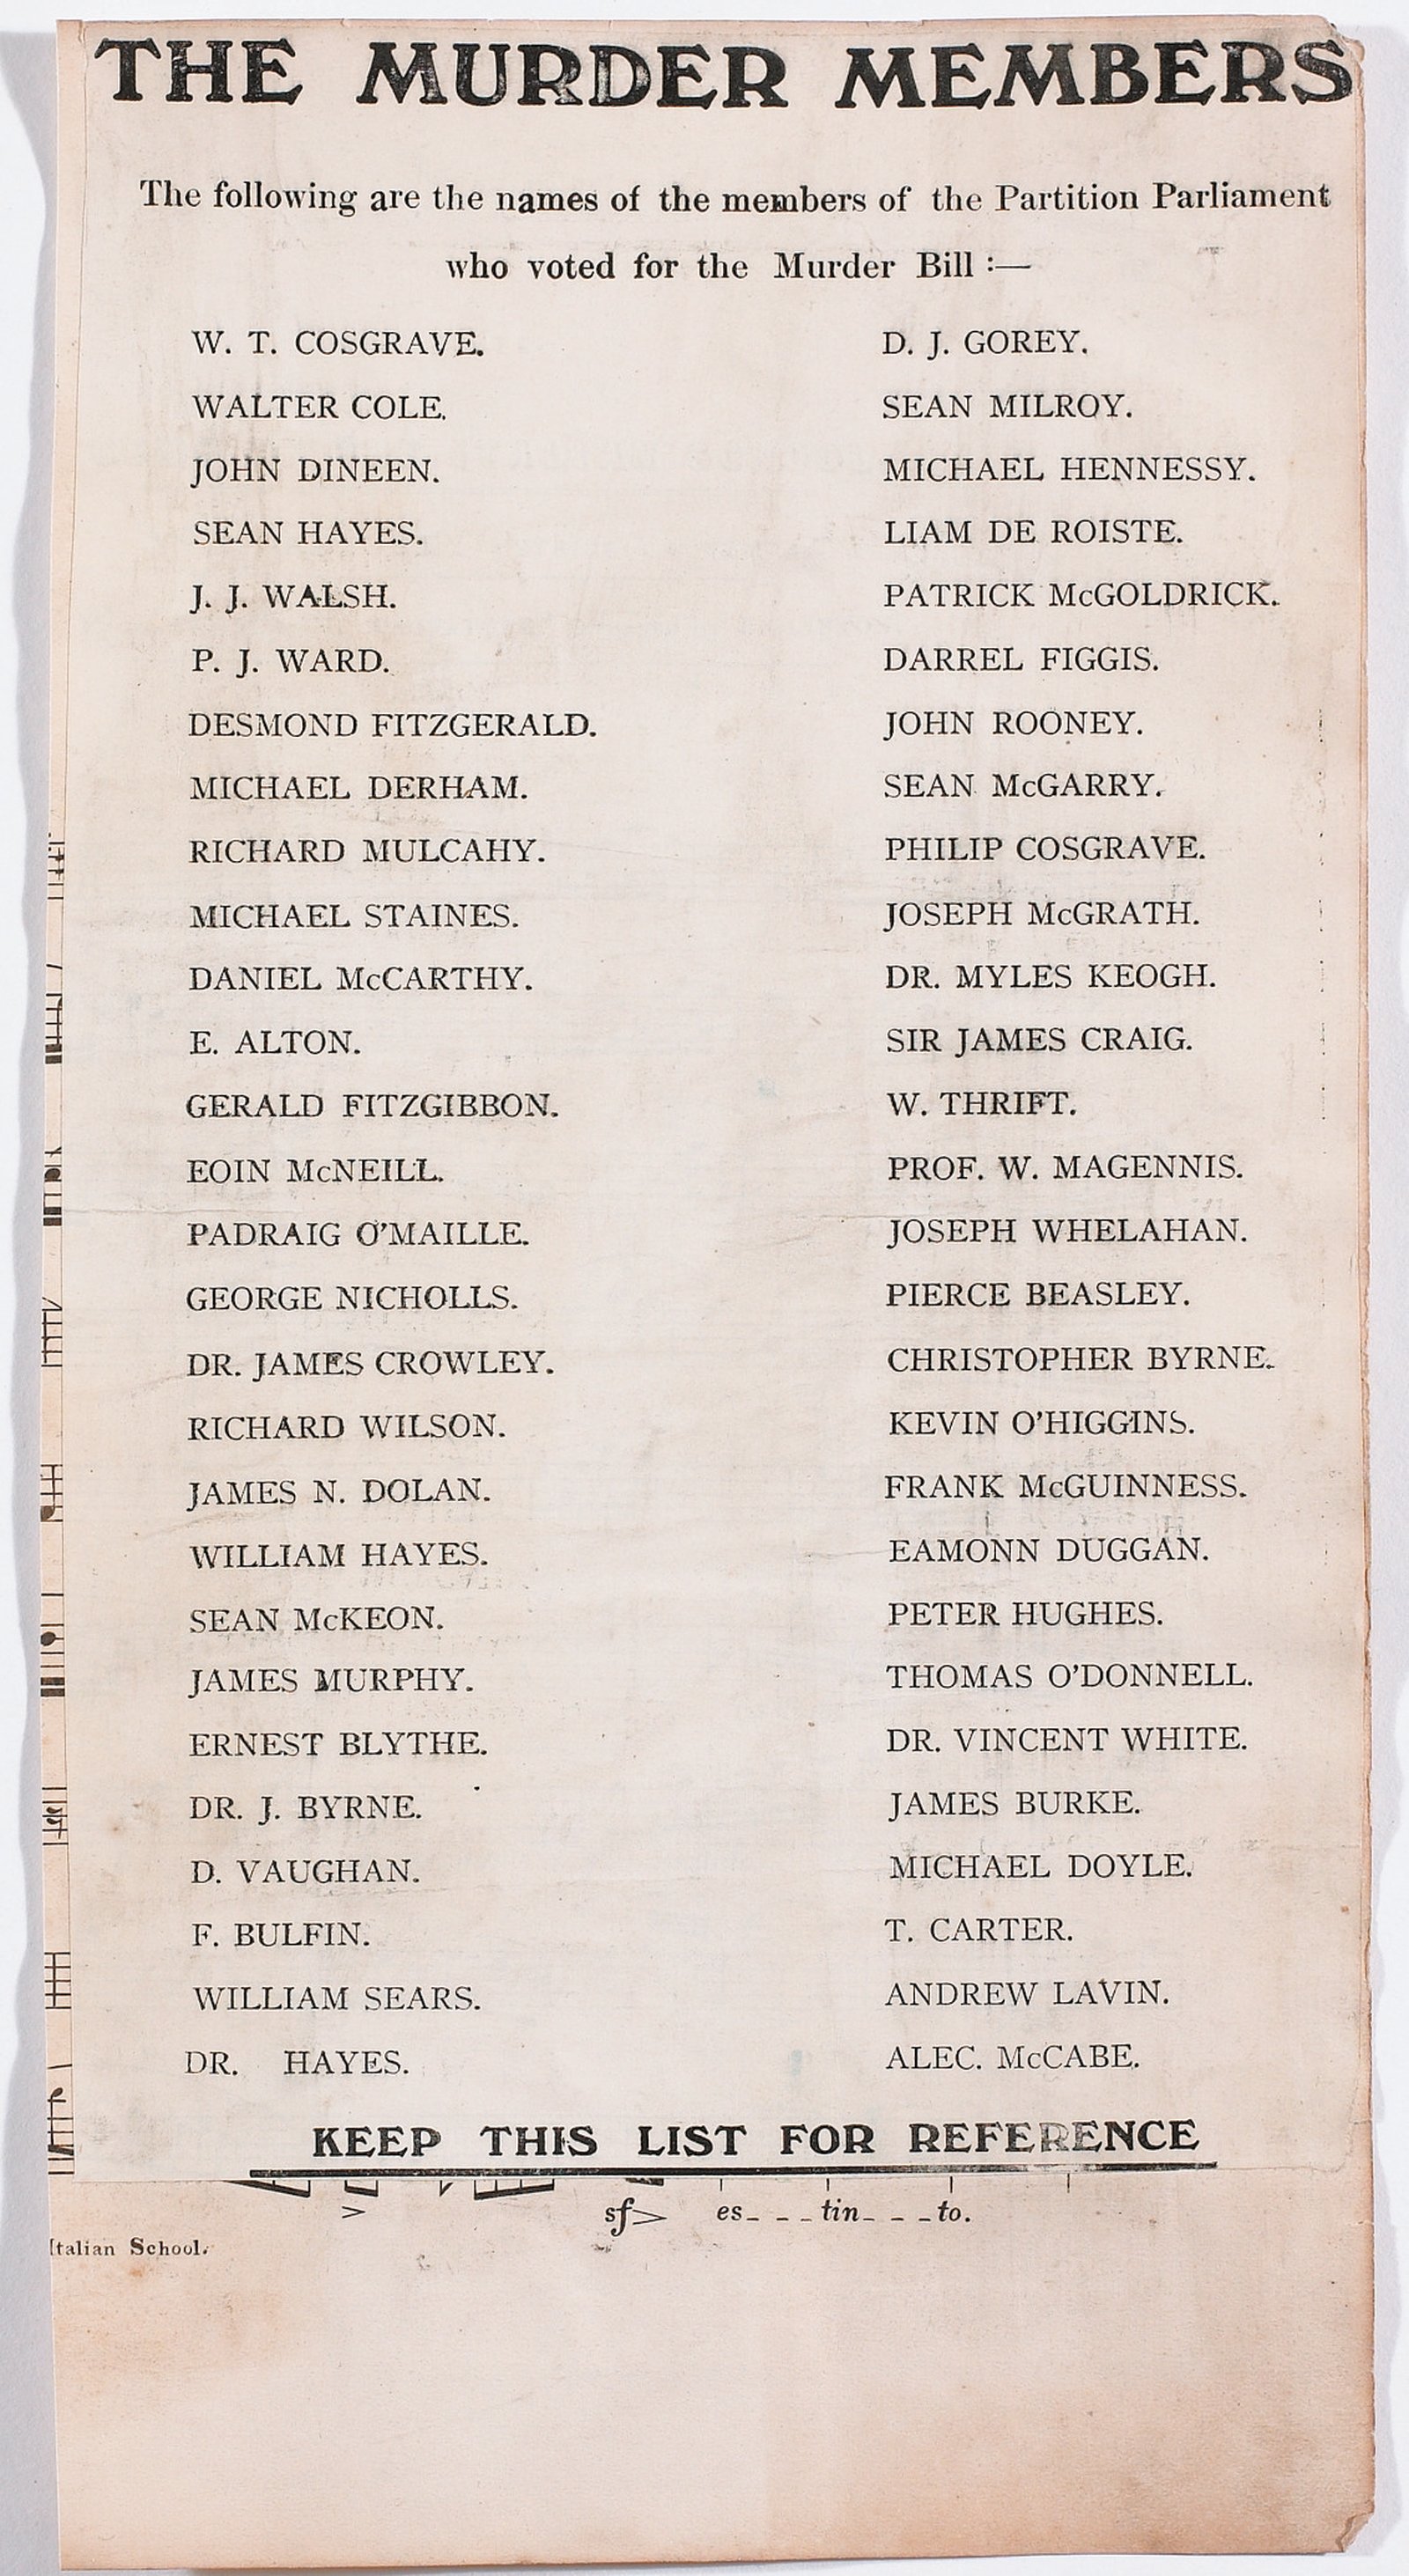 Image - Liam Lynch's Death-list: the 'Murder Members' poster. Credit: Image courtesy of Whytes.com